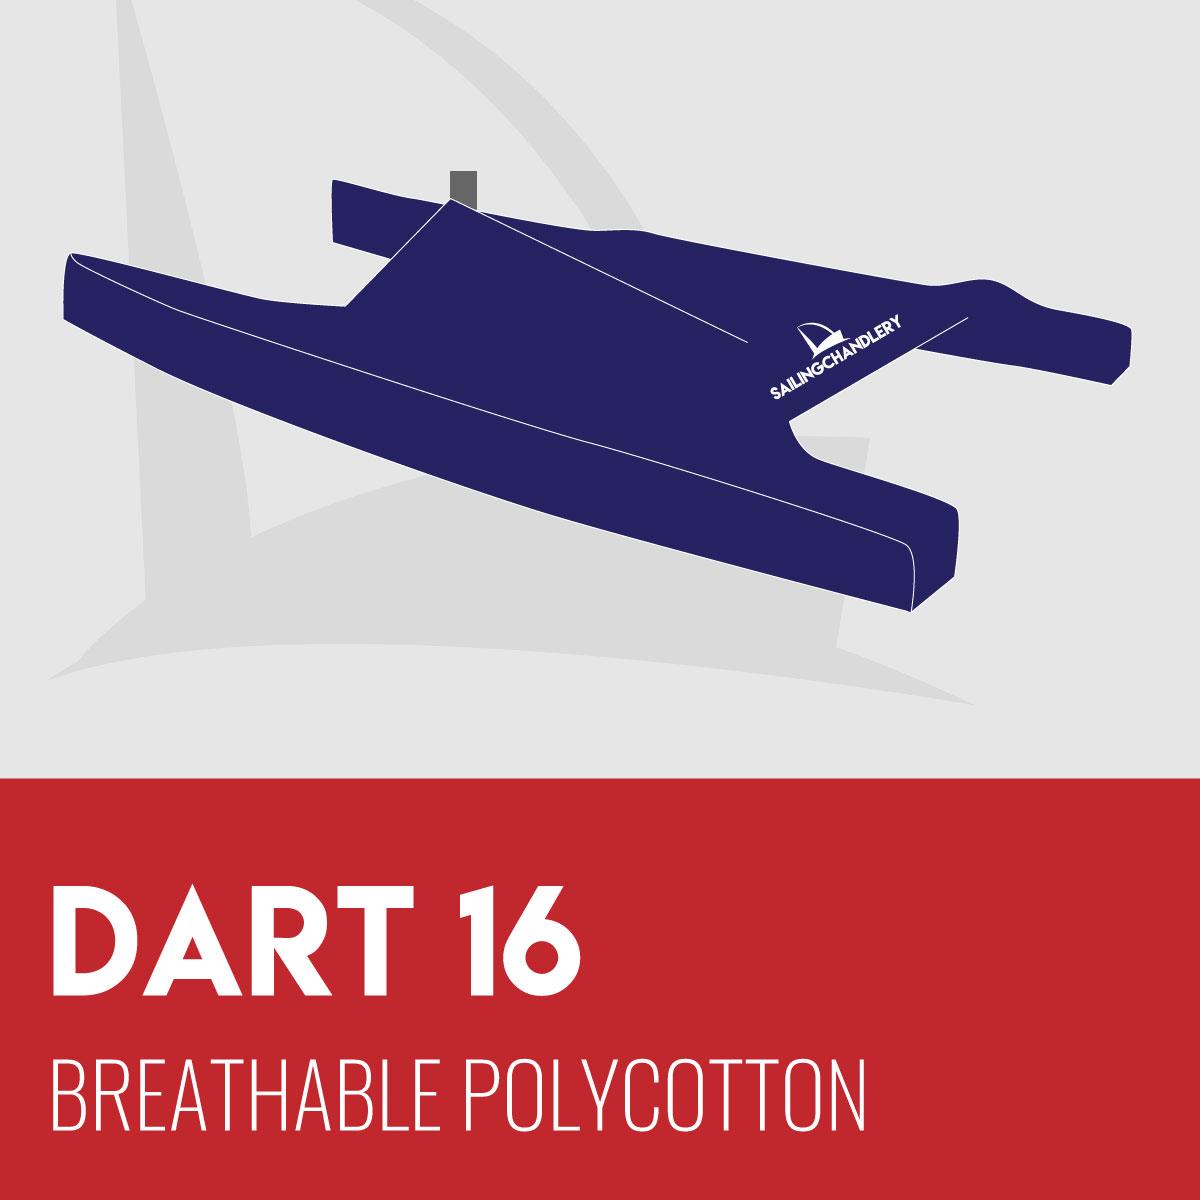 Dart 16 Boat Cover - Breathable Polycotton